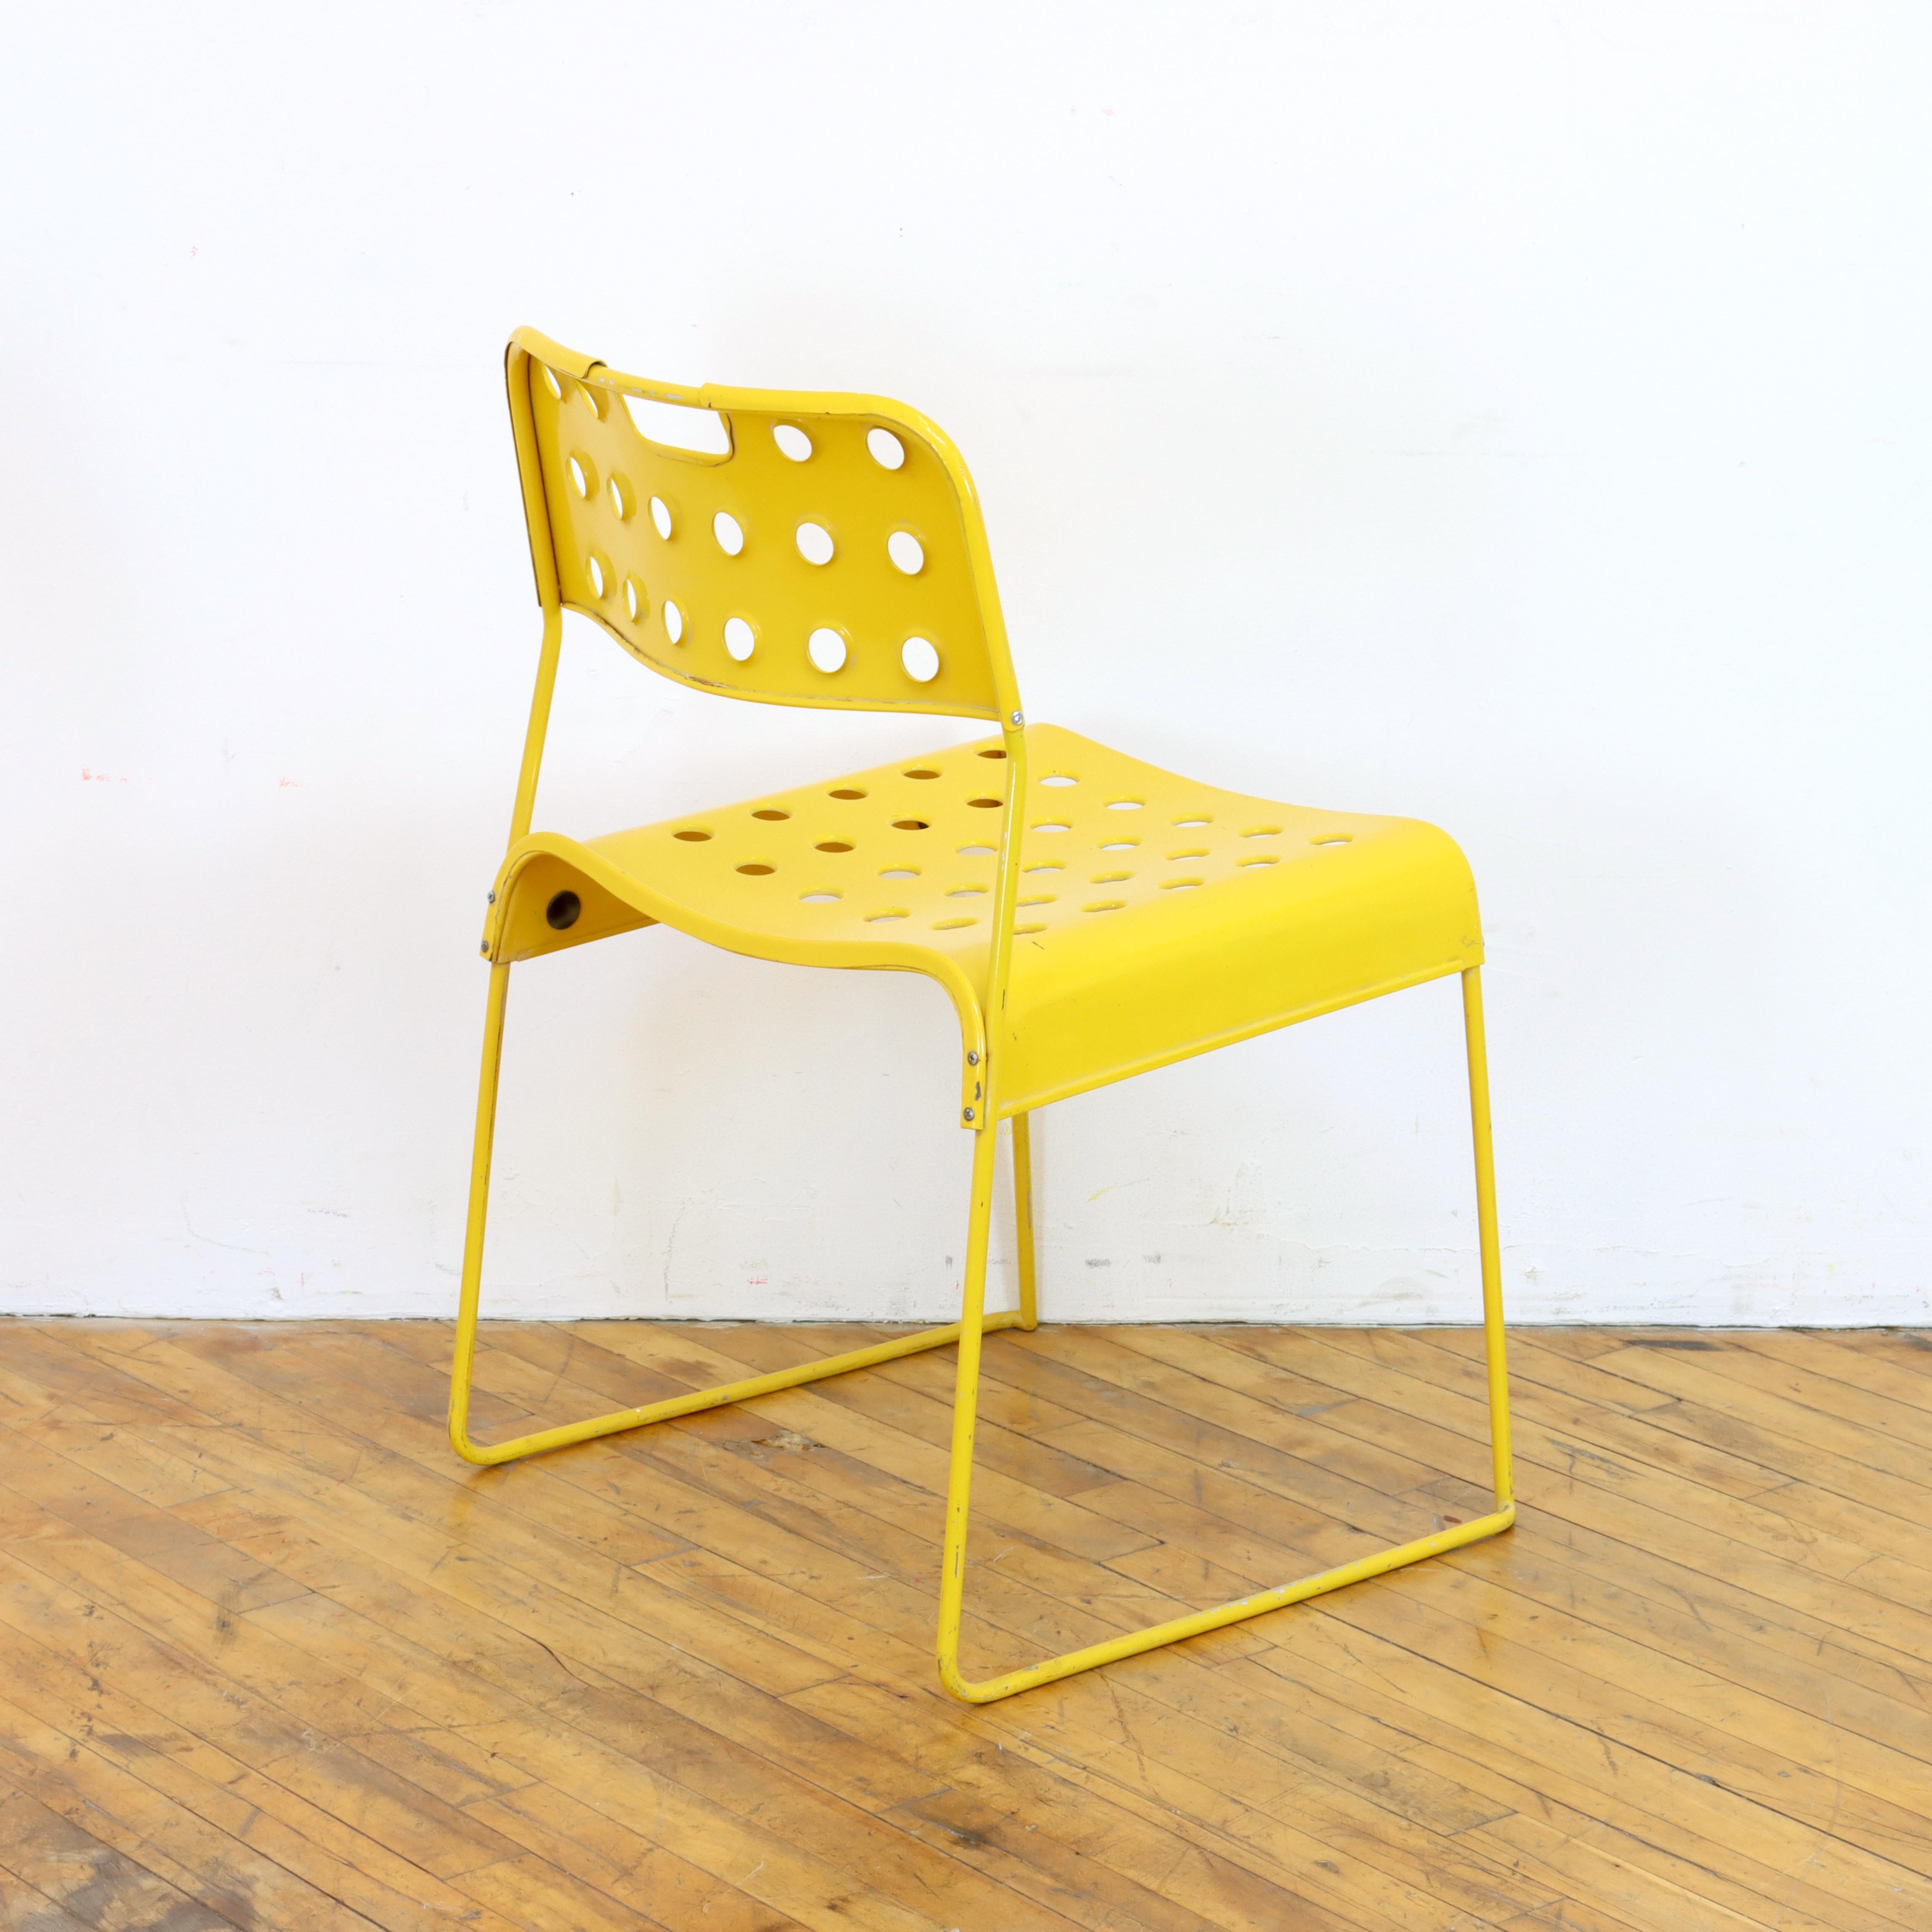 Pair of Vintage Yellow Omkstak Chairs  In Good Condition For Sale In Oakland, CA